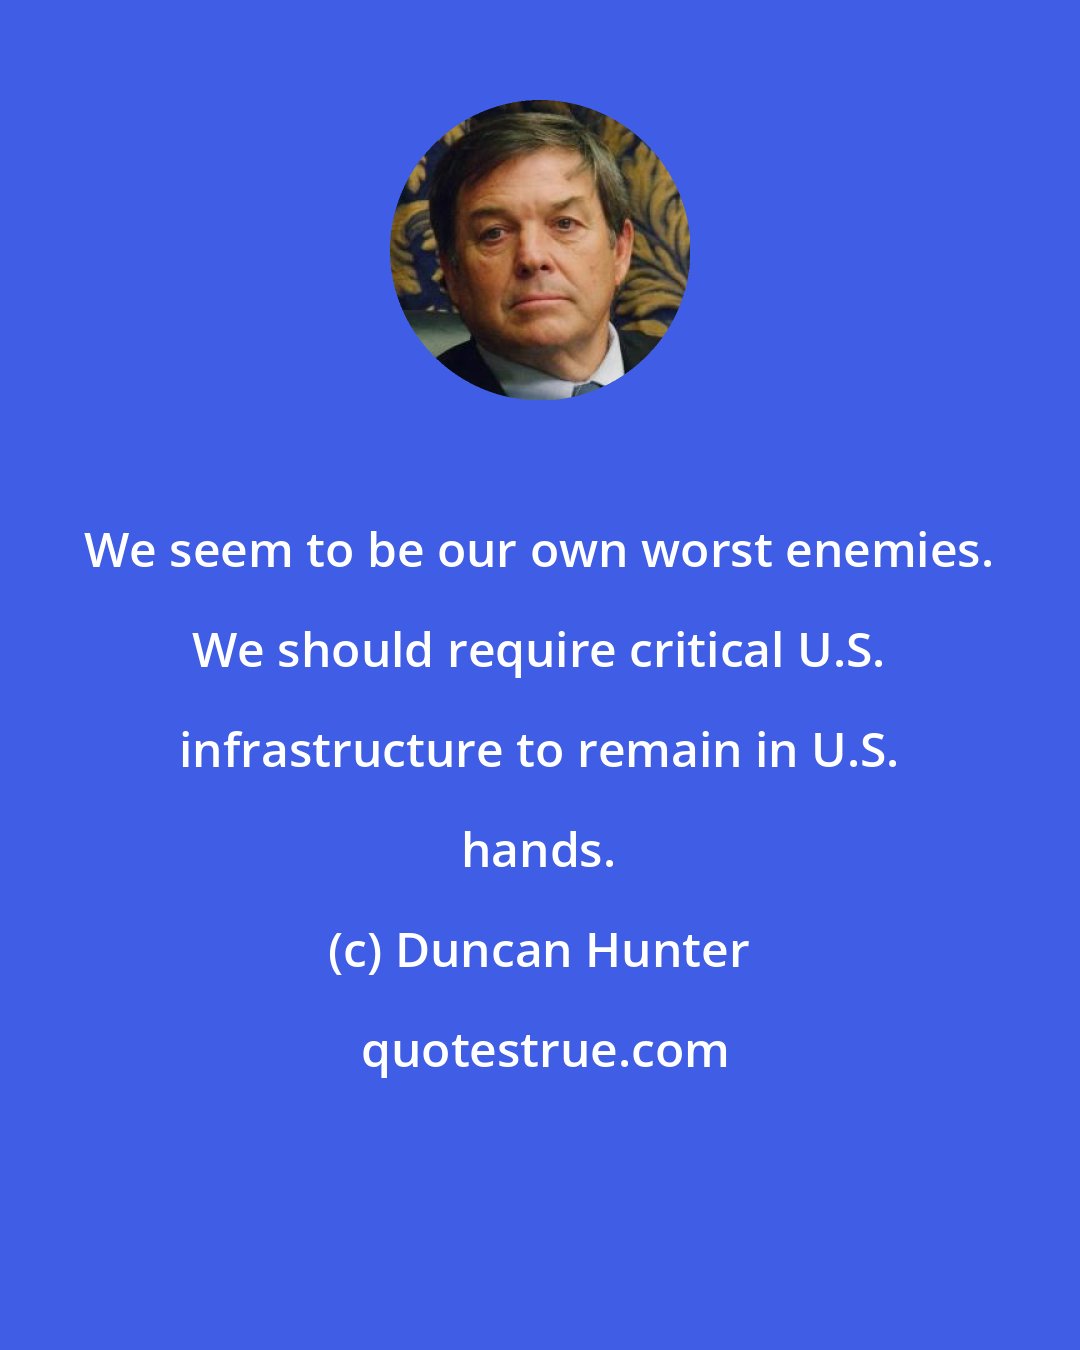 Duncan Hunter: We seem to be our own worst enemies. We should require critical U.S. infrastructure to remain in U.S. hands.